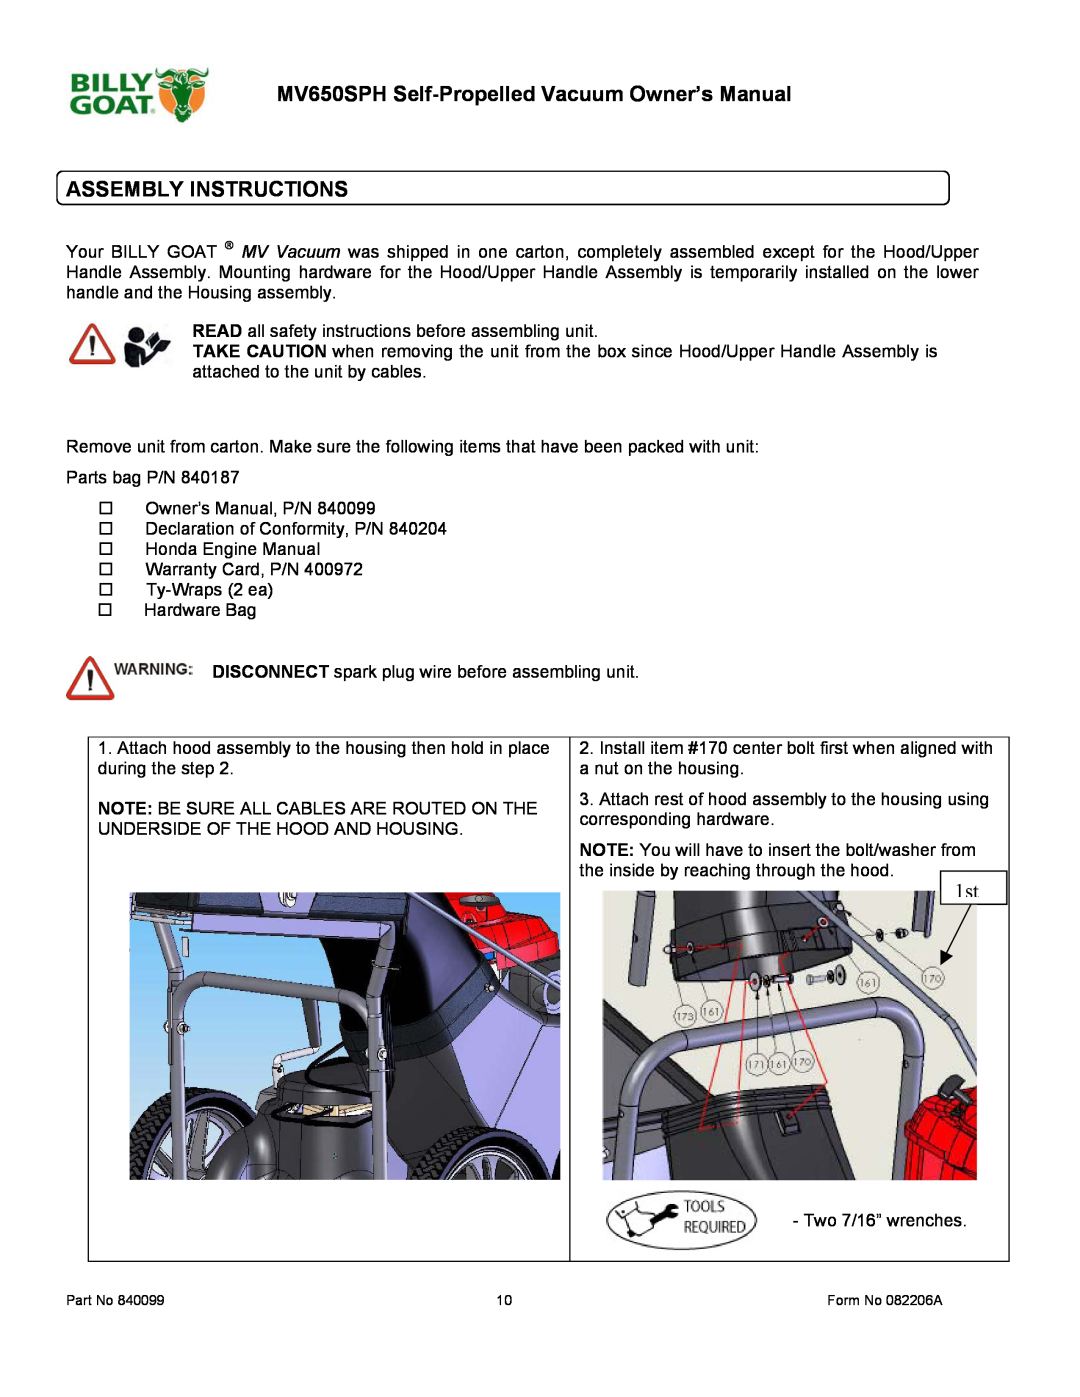 Billy Goat owner manual MV650SPH Self-Propelled Vacuum Owner’s Manual ASSEMBLY INSTRUCTIONS 